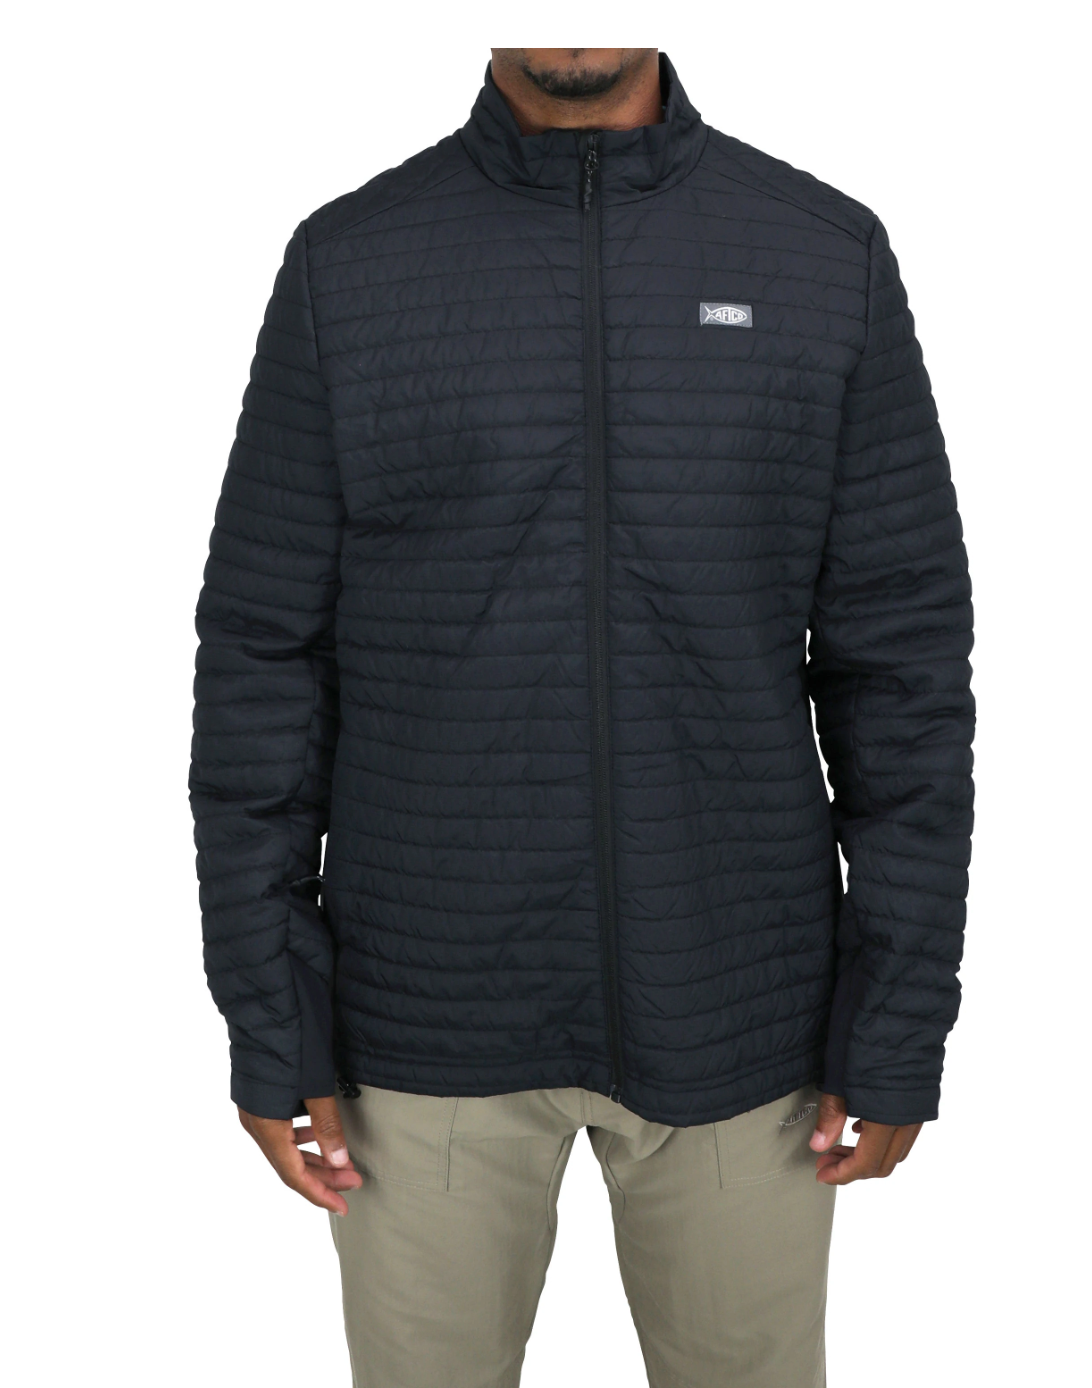 AFTCO - Covert Eco Jacket